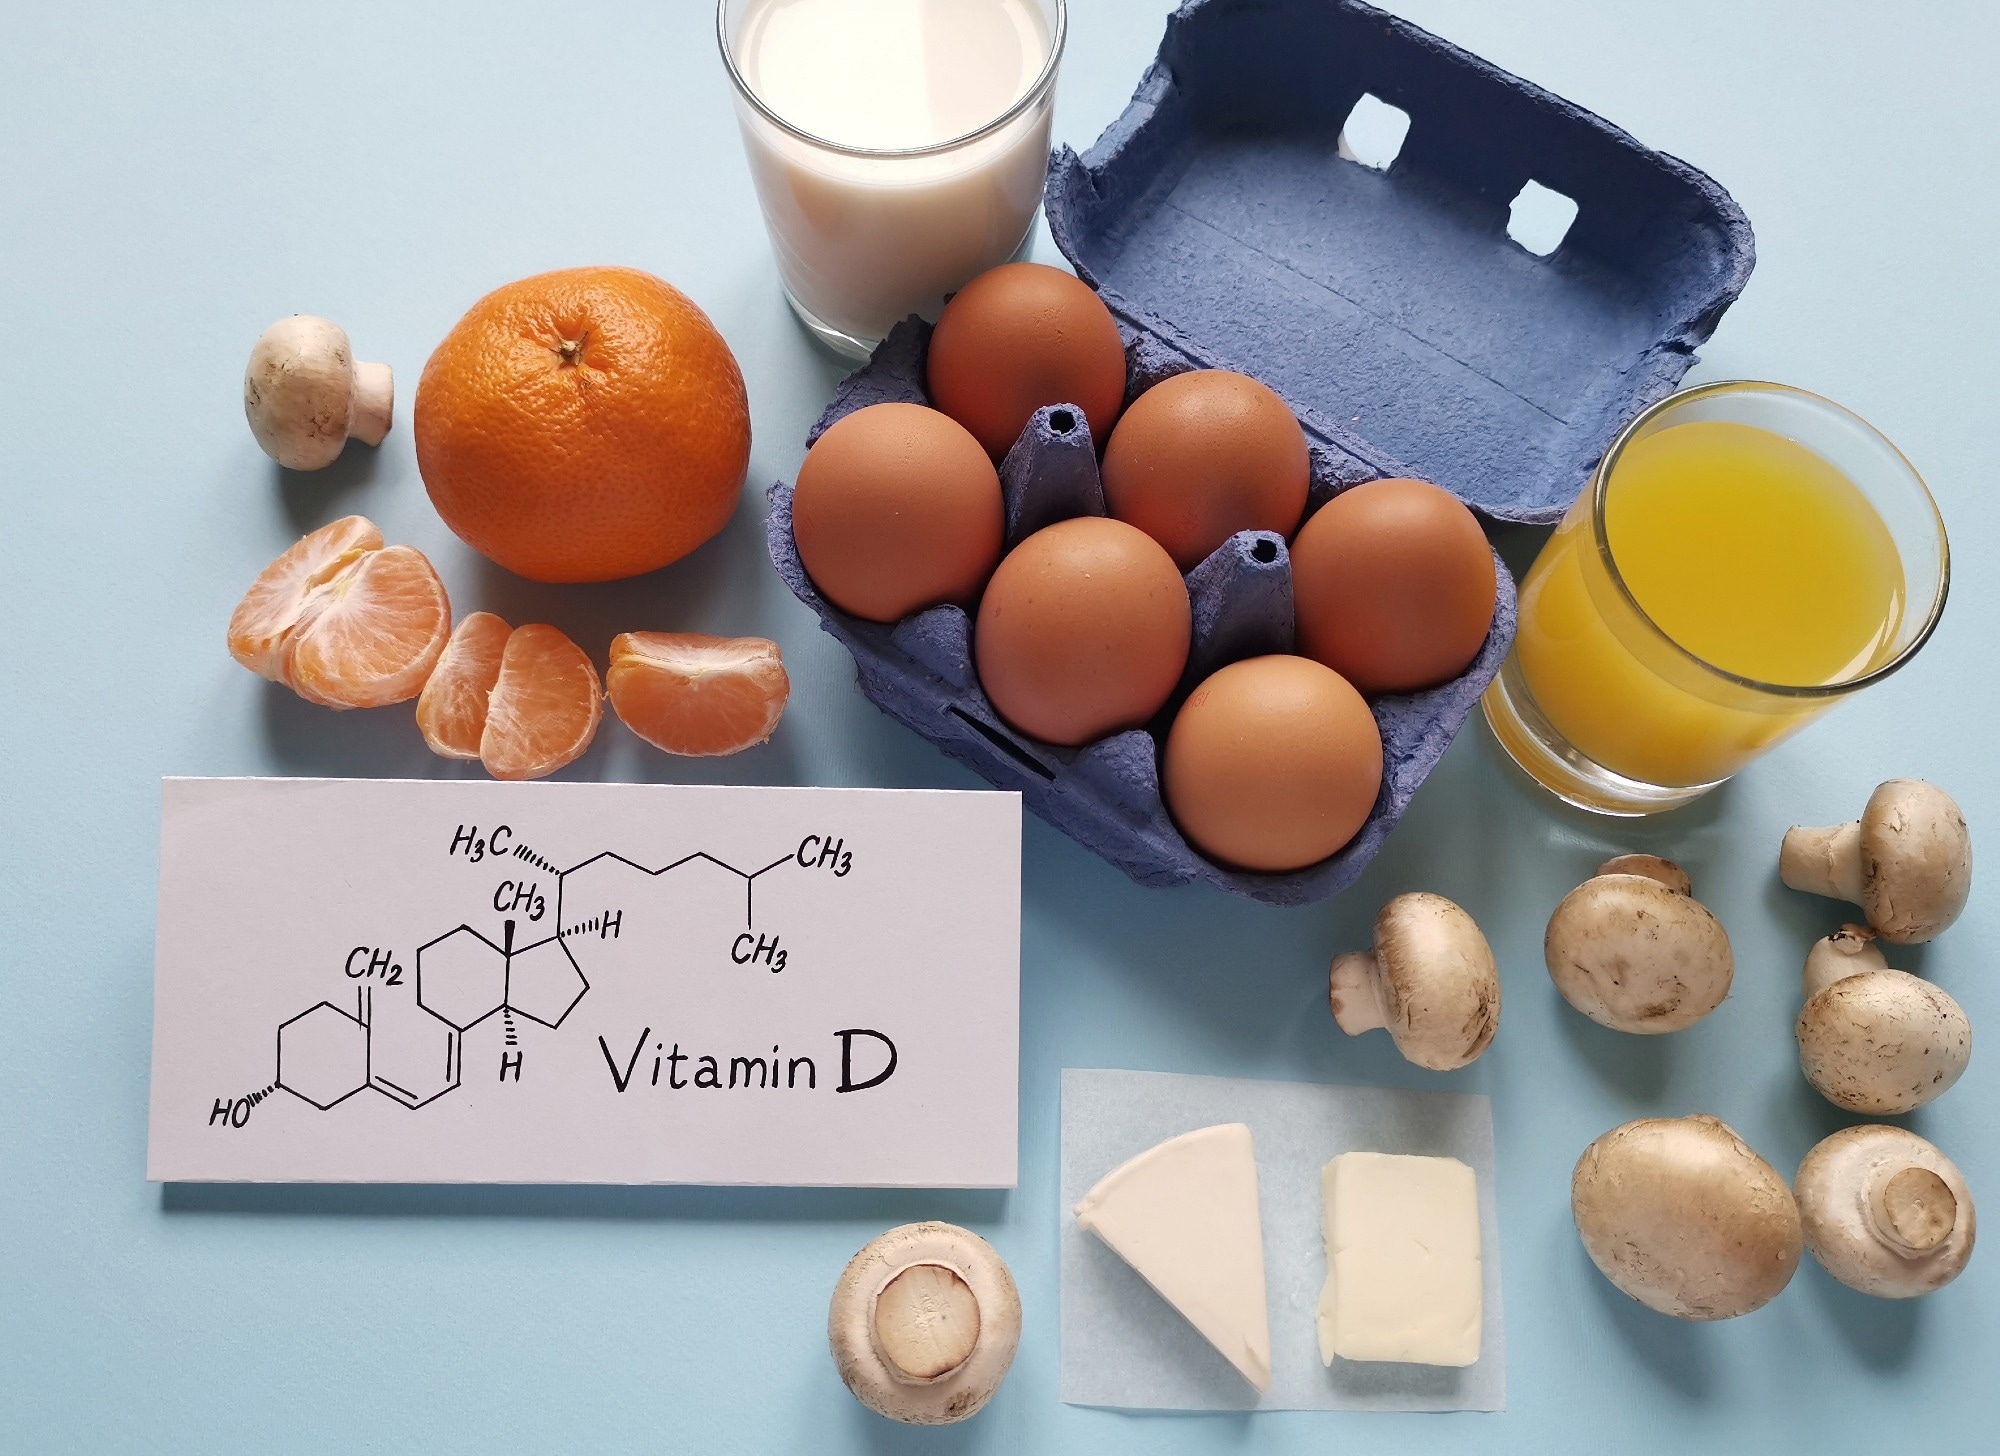 Study: Prenatal Vitamin D Levels Influence Growth and Body Composition until 11 Years in Boys. Image Credit: Danijela Maksimovic / Shutterstock.com